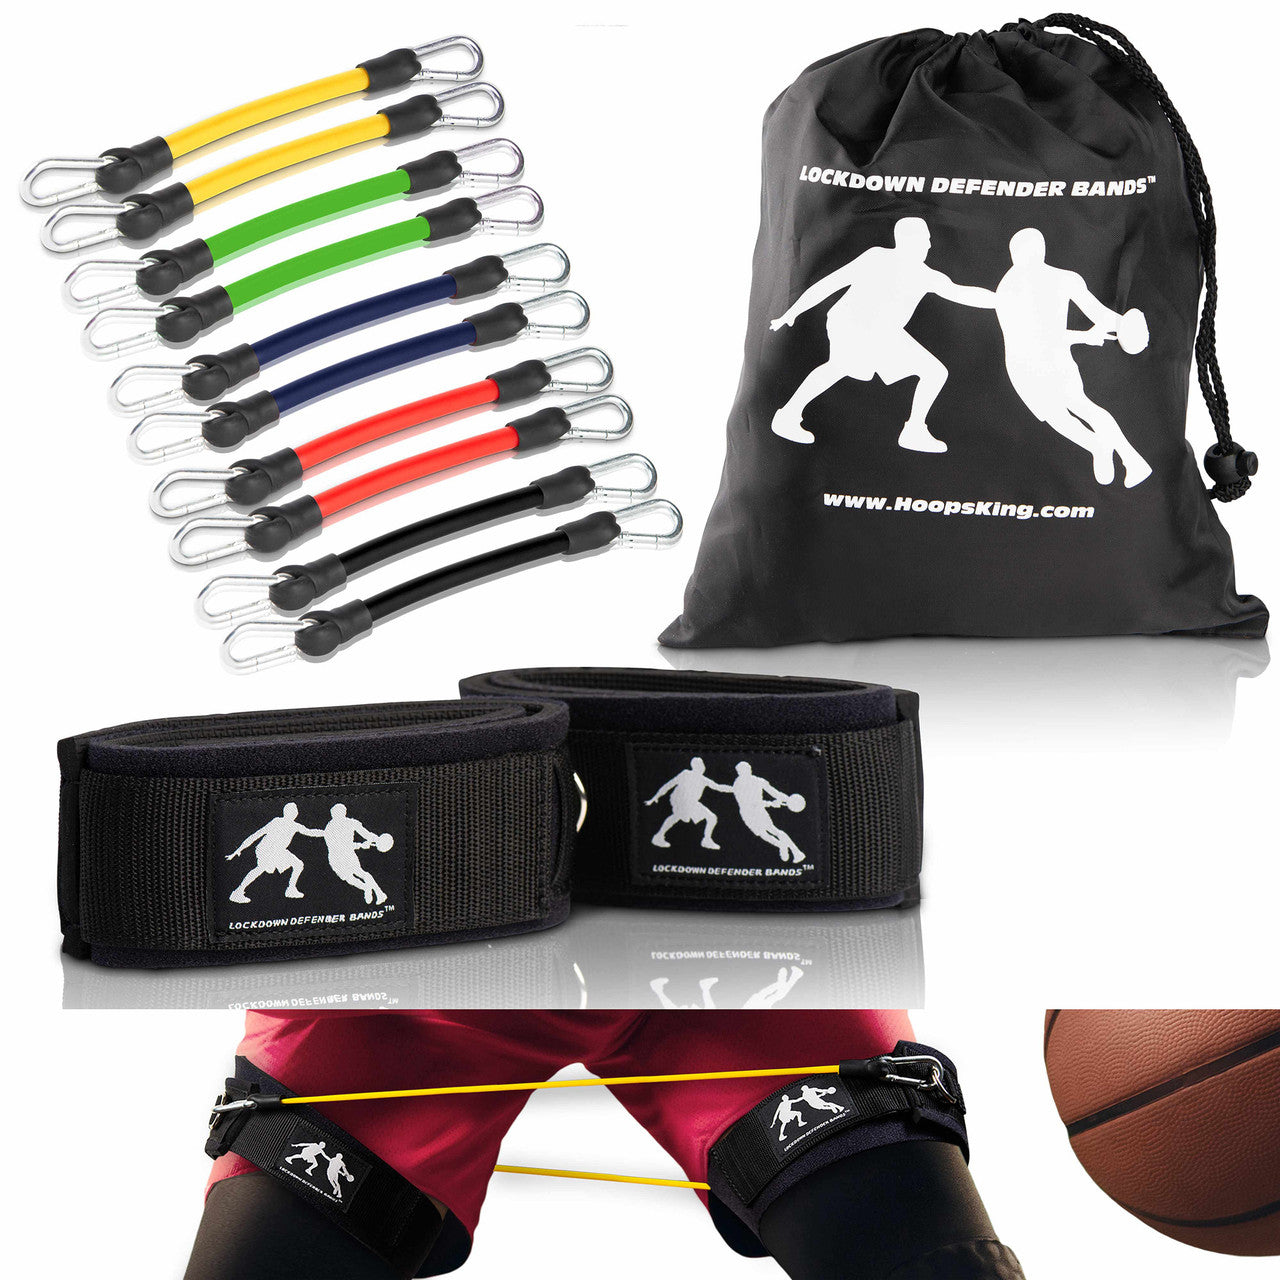 The LockDown Defender bands will help you increase your lateral quickness.  Comes with convenient carry bag and 5 pairs of resistance bands.  Also great for programs such as P90X, T25, Body Best, & Insanity.  Take your Beachbody workouts to another level.